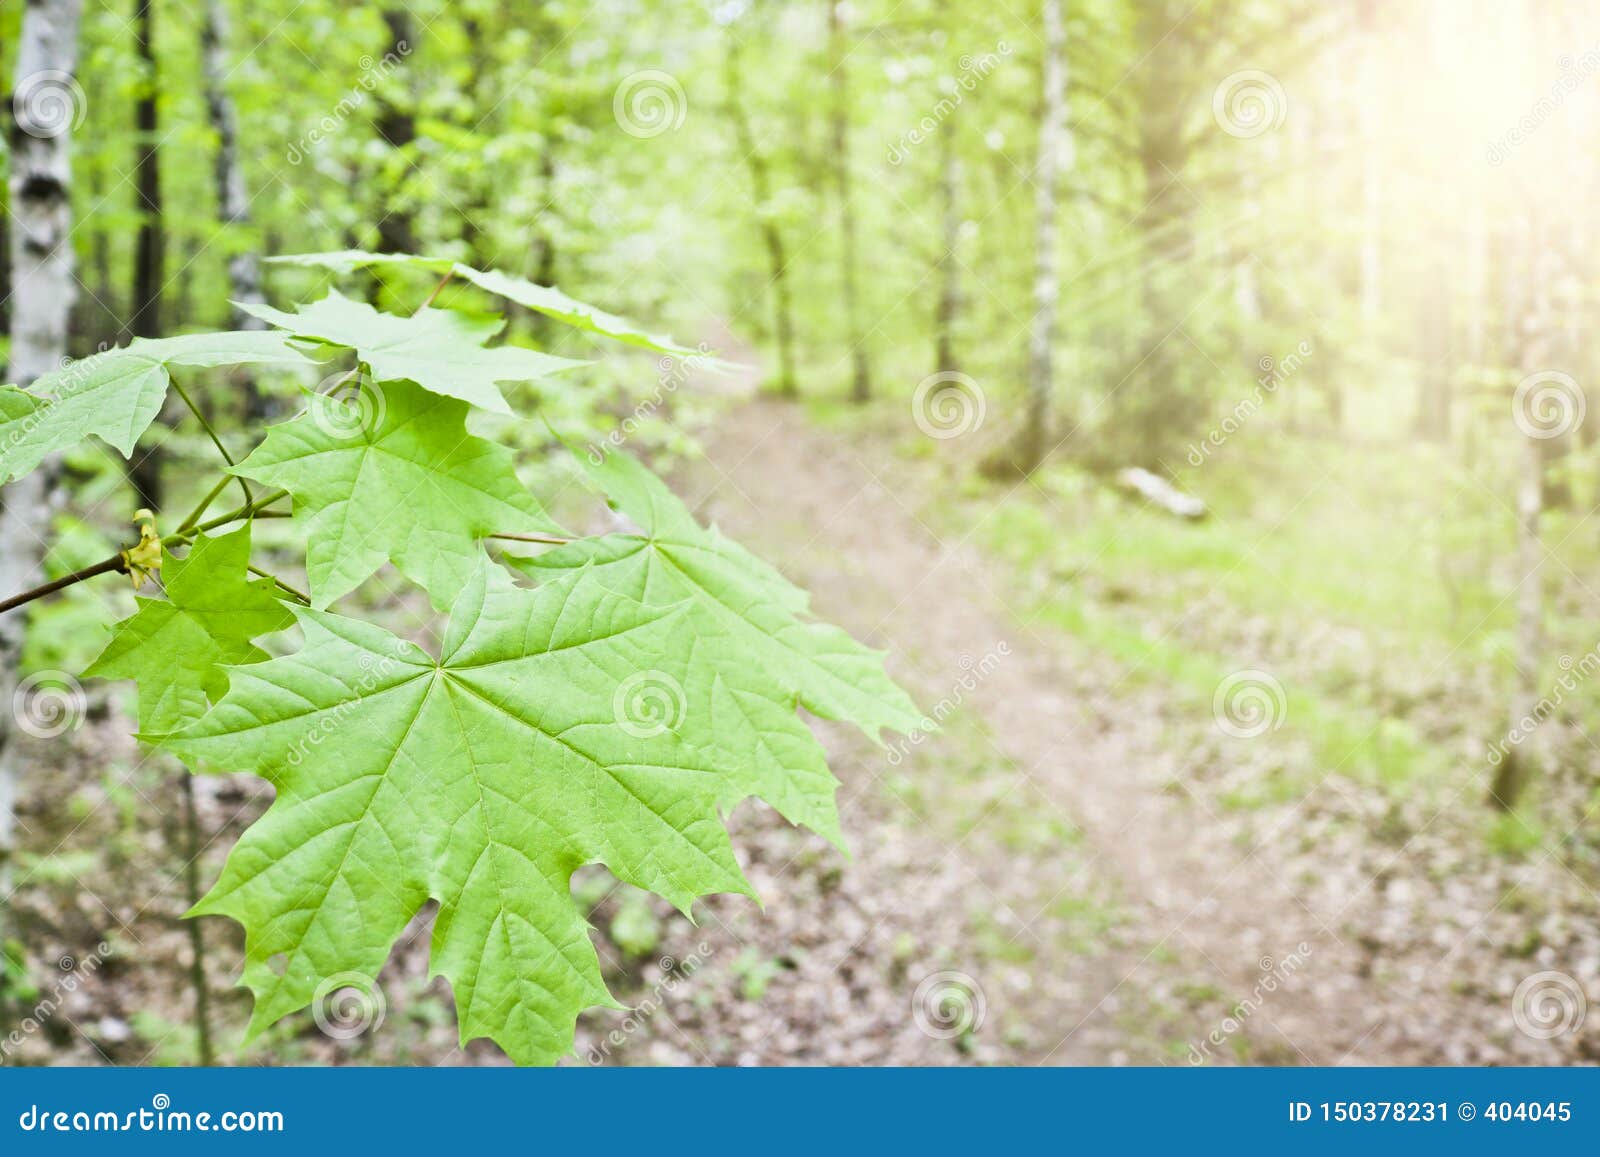 Sugar Maple Or Rock Maple Acer Saccharum Leaves Close Up On The Background Of The Footpath In The Spring Forest Stock Image Image Of Decoration Bright